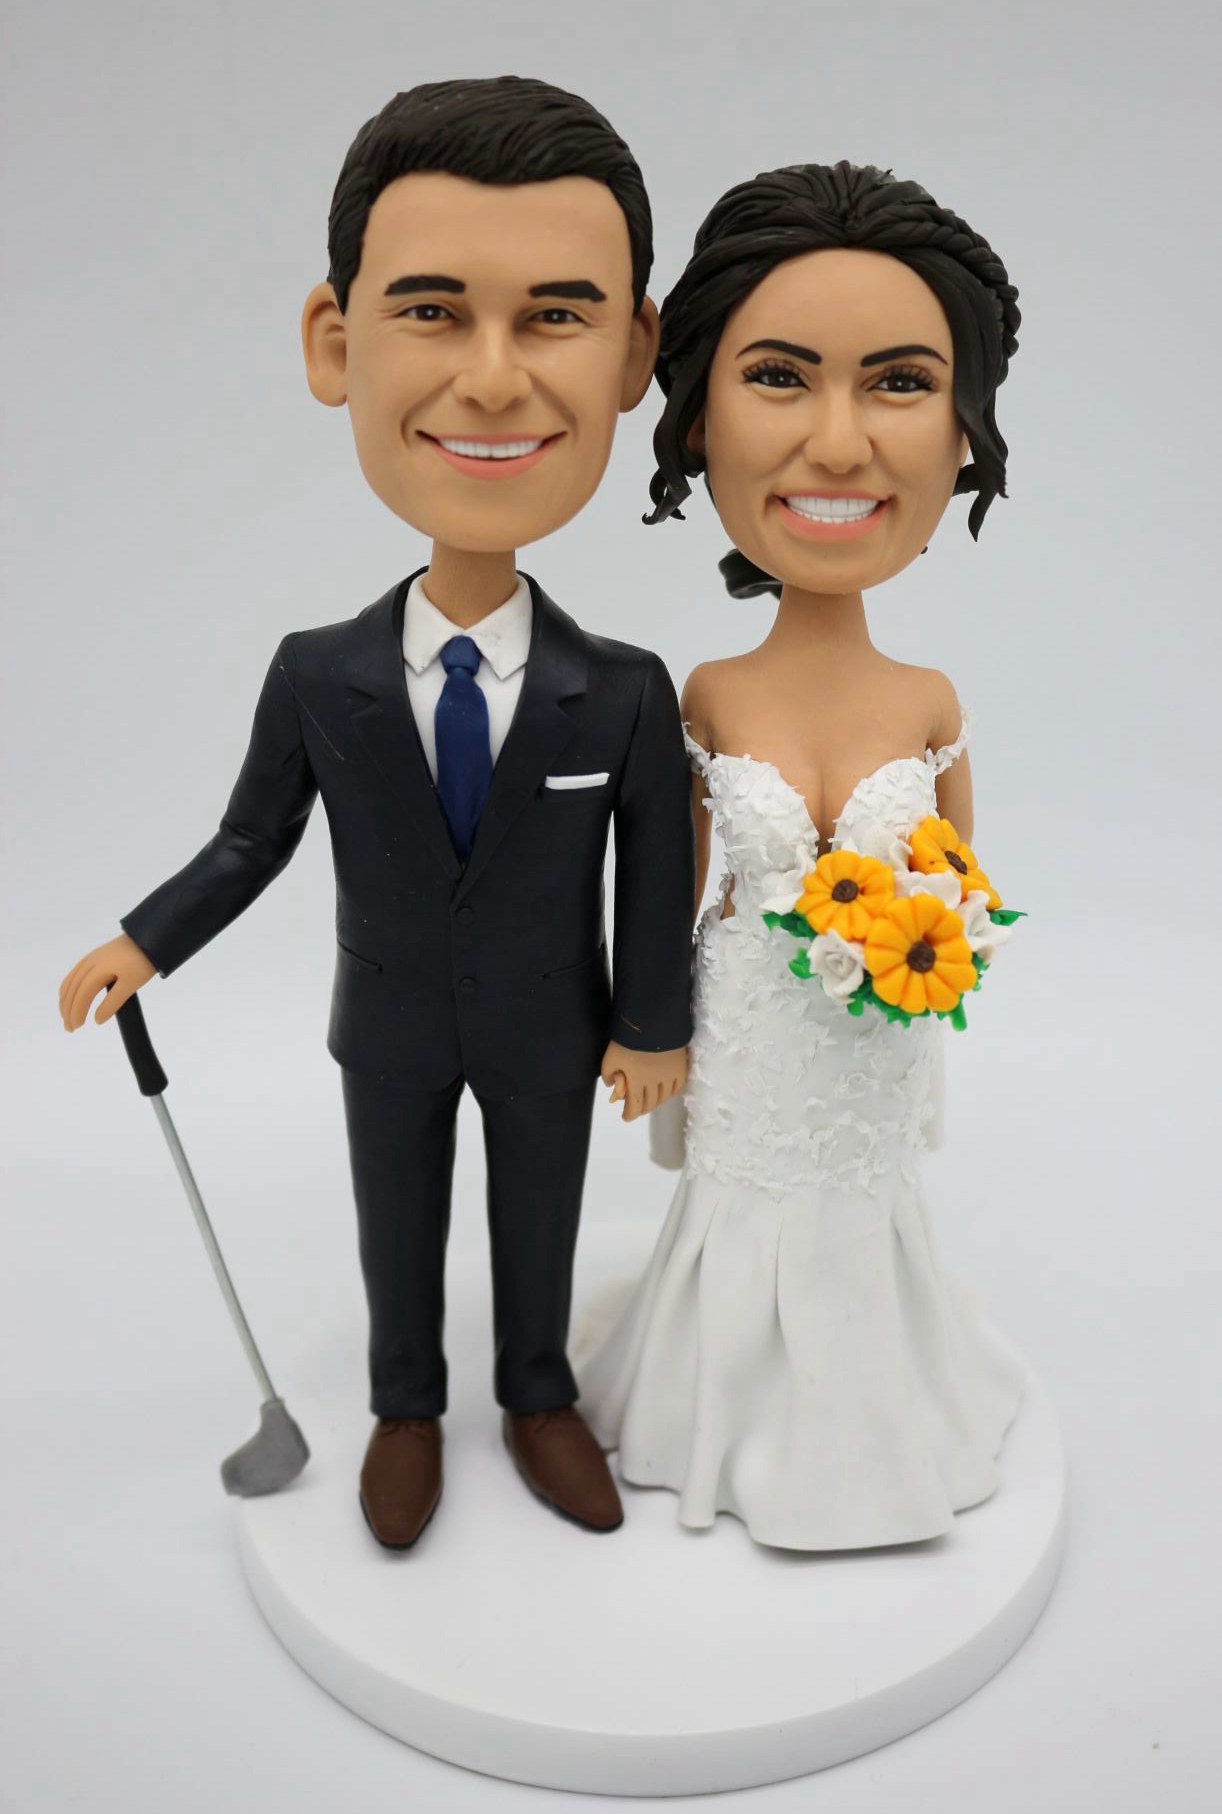 Custom cake toppers Groom holding his golf club (or any add ons)